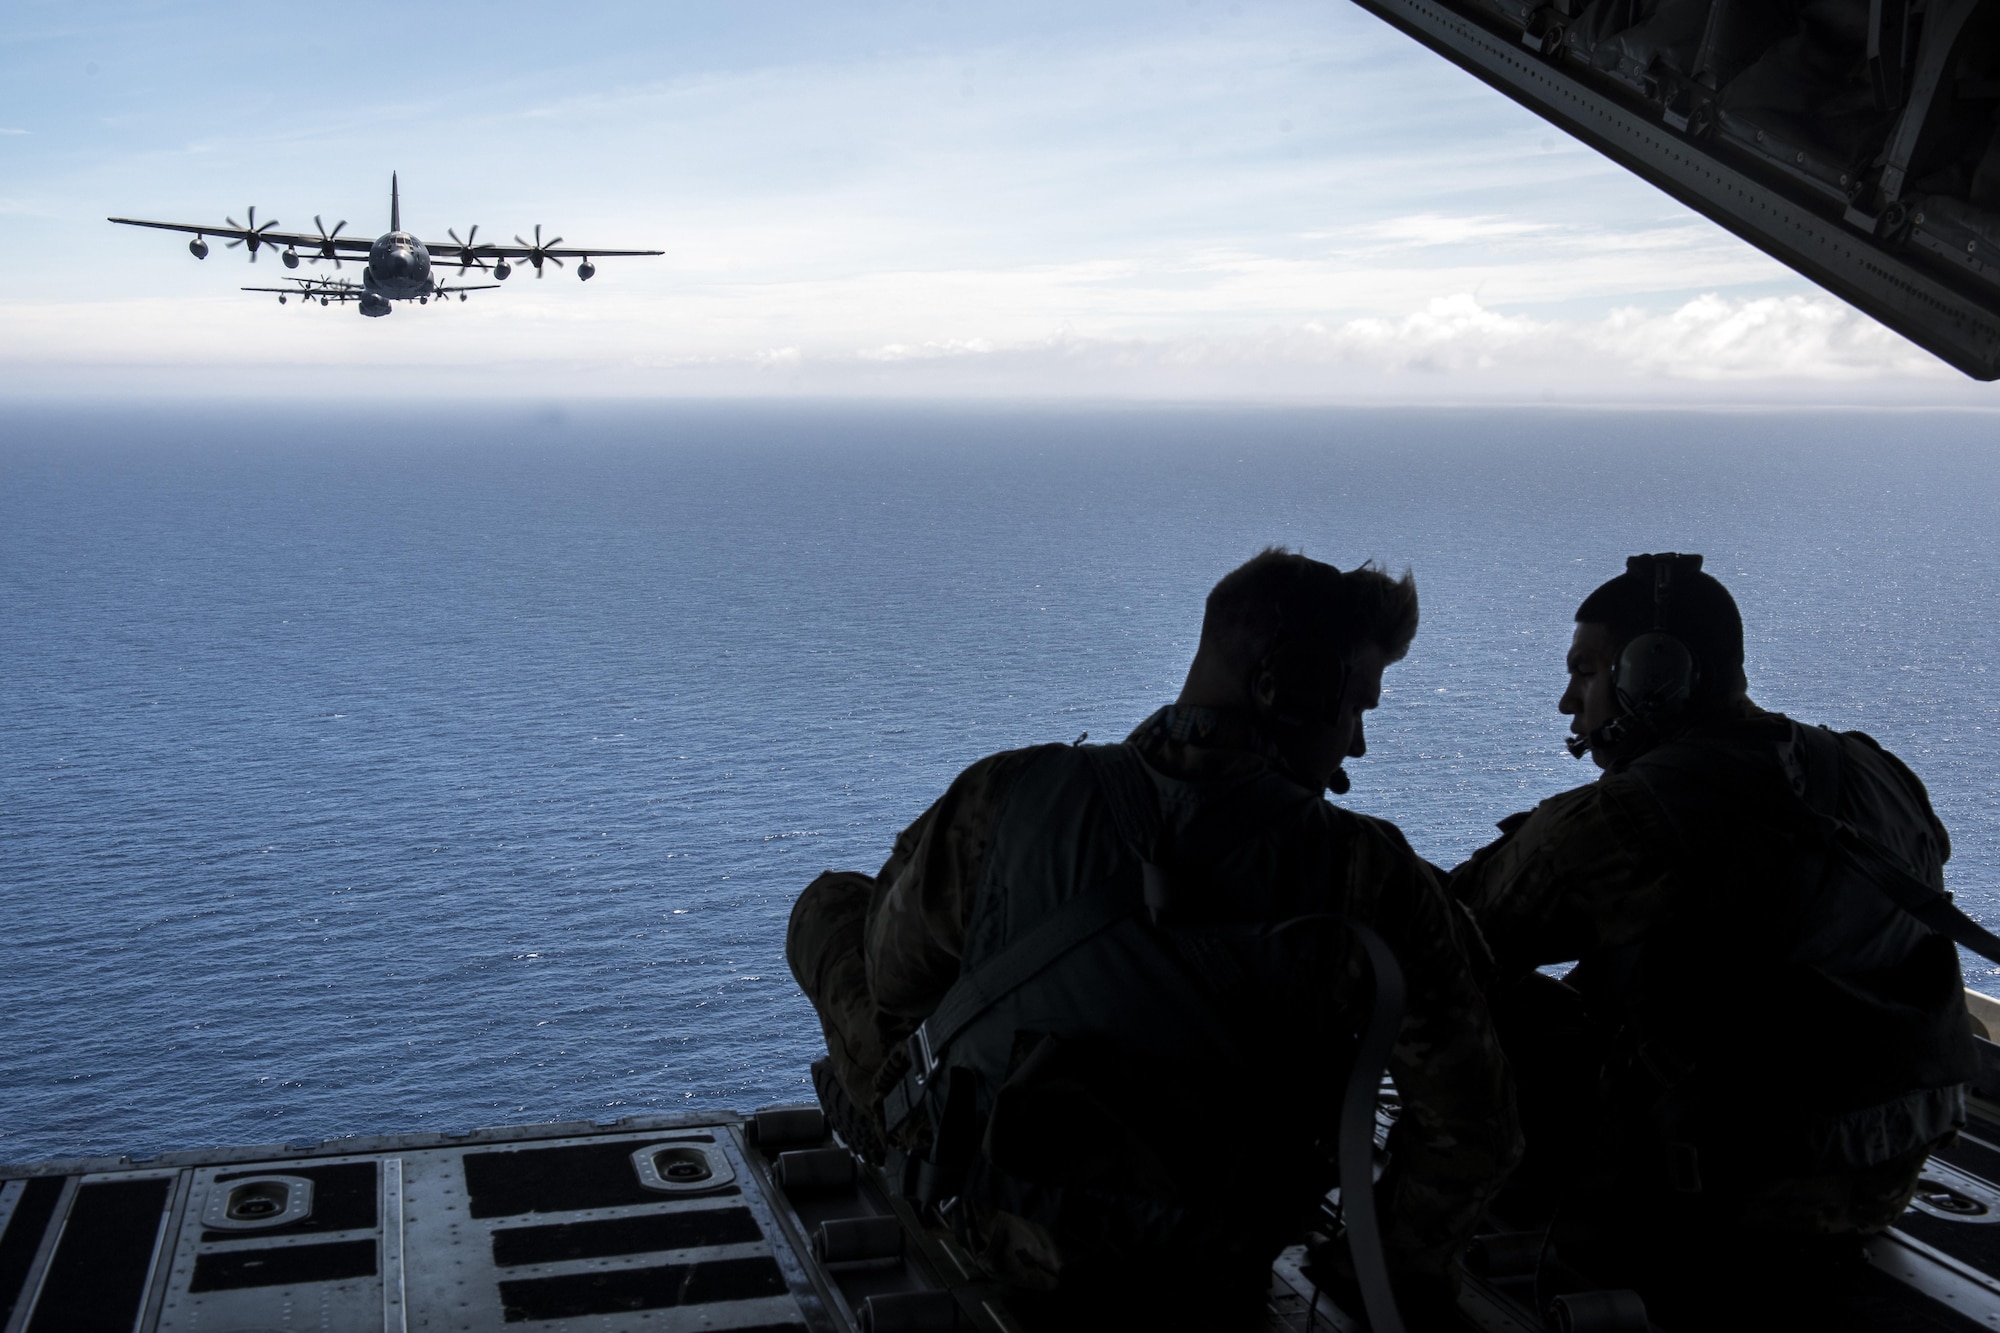 U.S. Air Force loadmaster Airmen, from the 17th Special Operations Squadron, overserve a five-aircraft formation comprised of MC-130J Commando IIs June 22, 2017 off the coast of Okinawa, Japan, during a mass launch training mission. Airmen from the 17th SOS conduct training operations often to ensure they are always ready perform a variety of high-priority, low-visibility missions throughout the Indo-Asia-Pacific-Region. (U.S. Air Force photo by Senior Airman John Linzmeier)